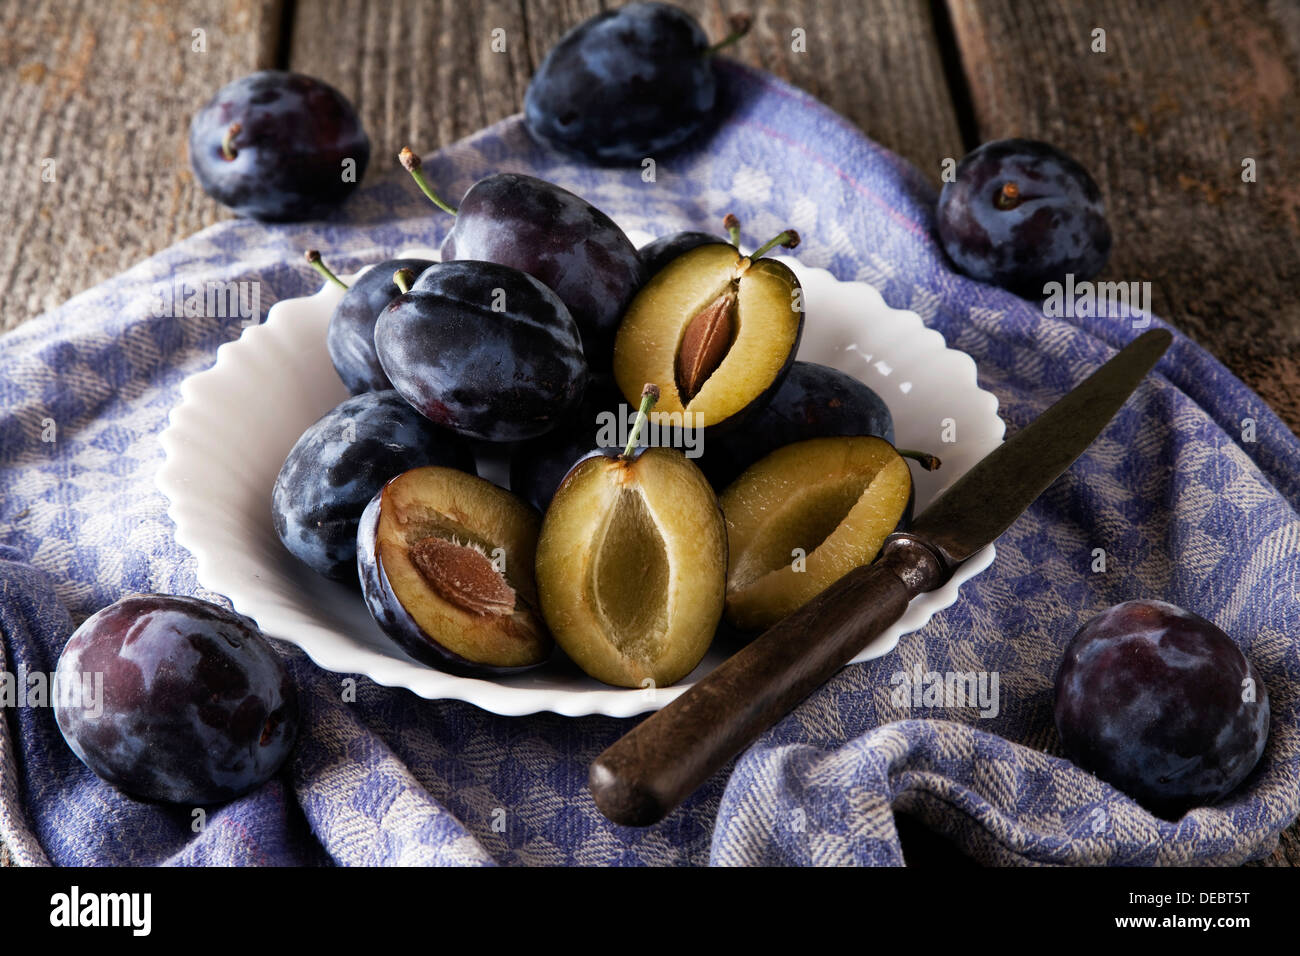 Fresh plums (Prunus domestica) on plate, with a knife and a kitchen towel Stock Photo